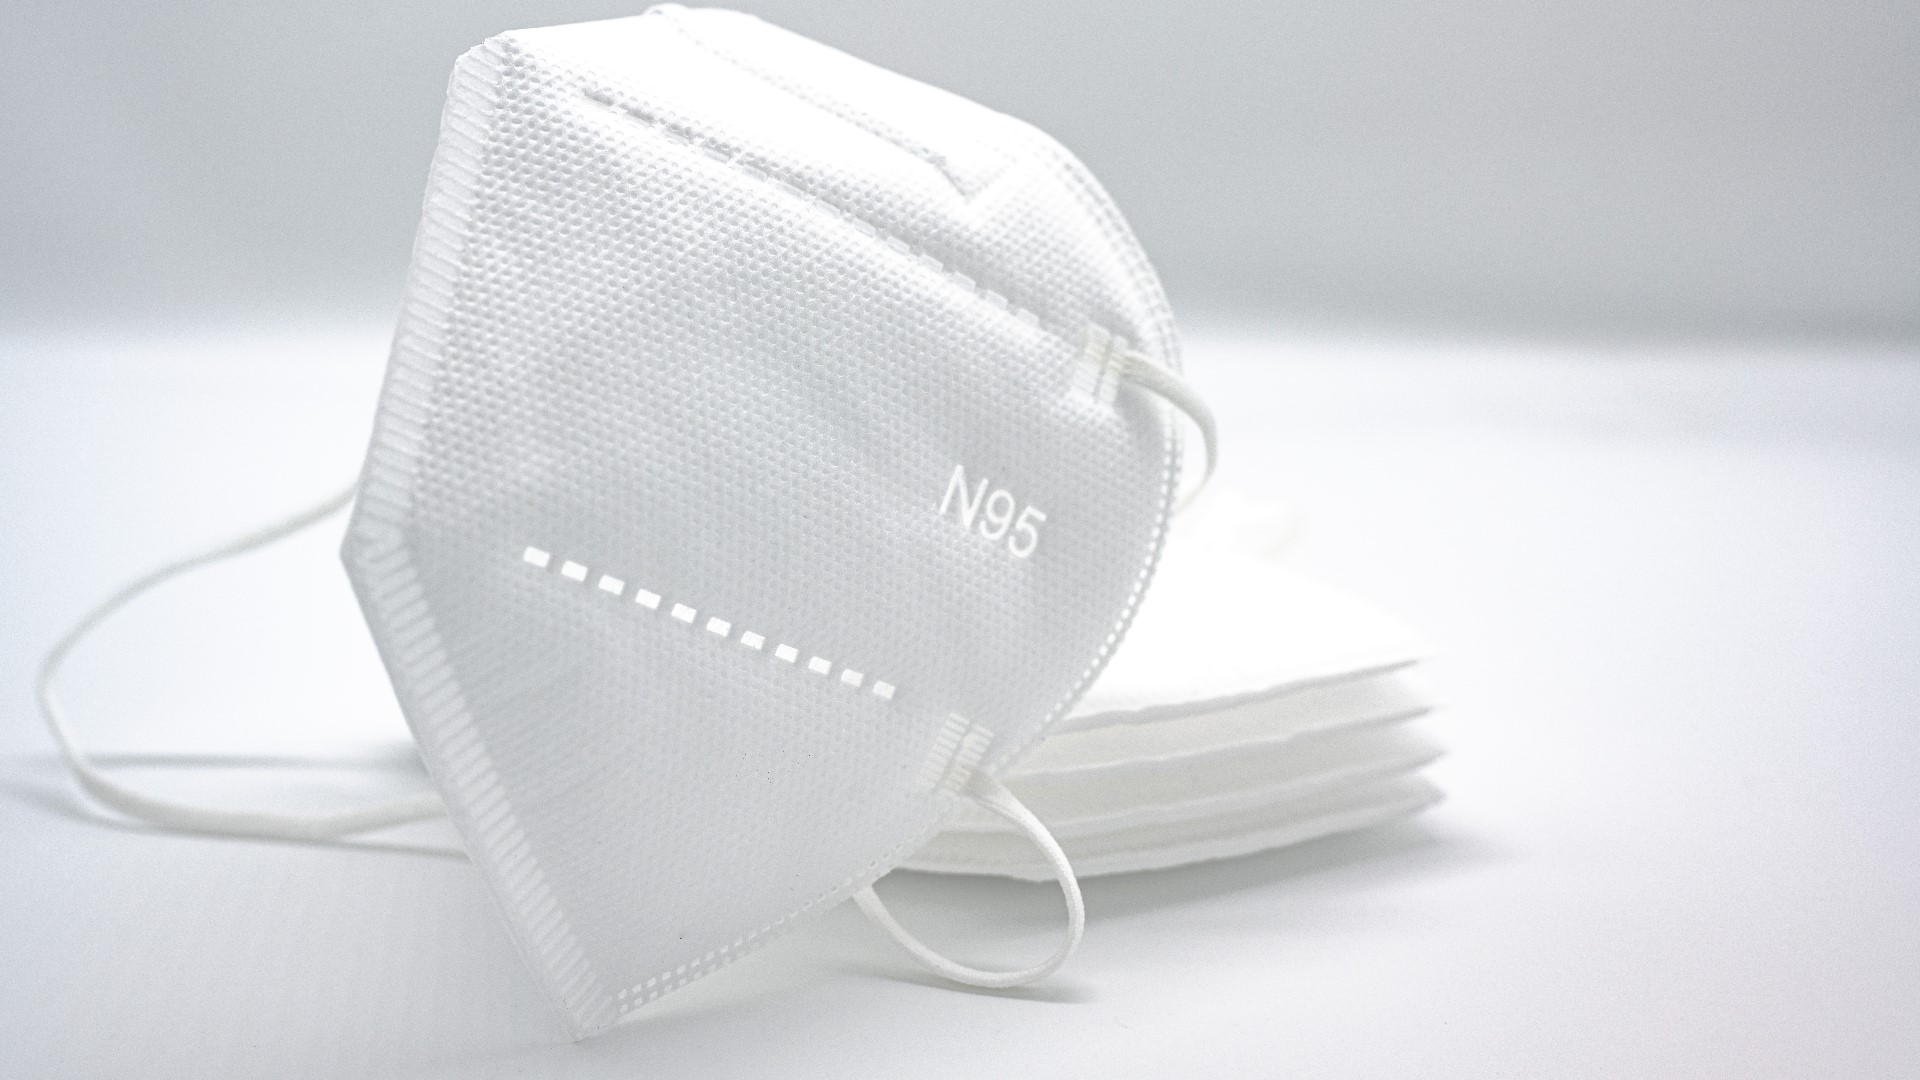 The Trump administration considered and shelved plans to use national stockpiles to give N95 masks to Americans. President Biden has taken up that initiative.